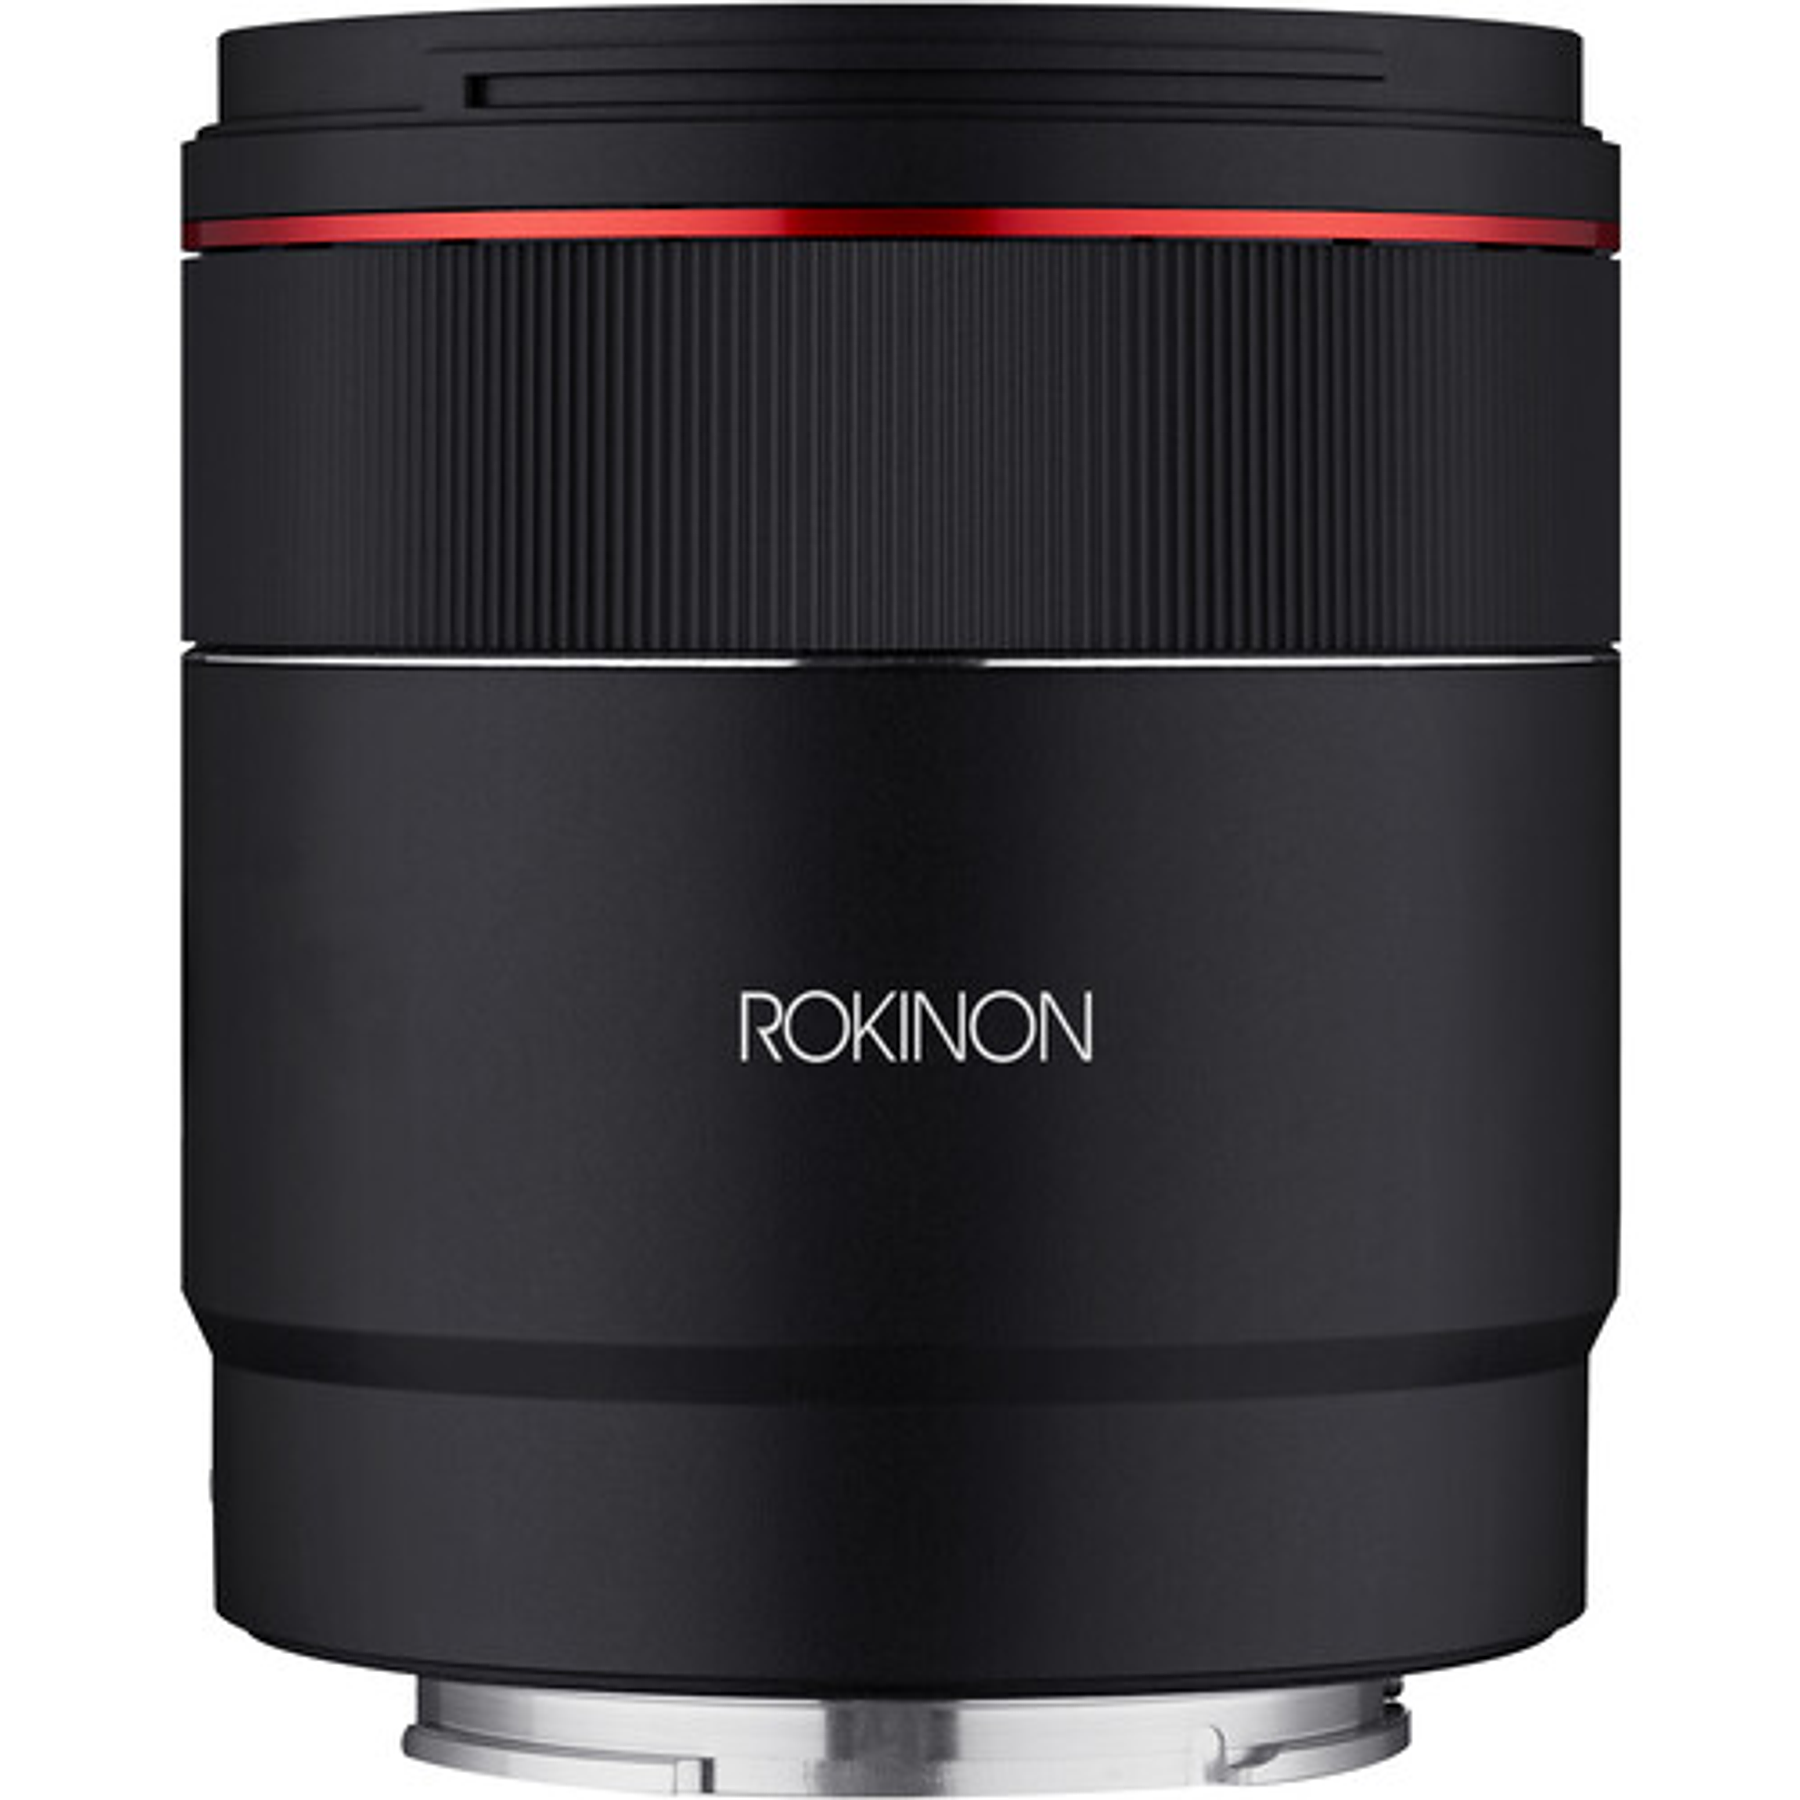 Rokinon 24mm f/1.8 AF Compact Sony E